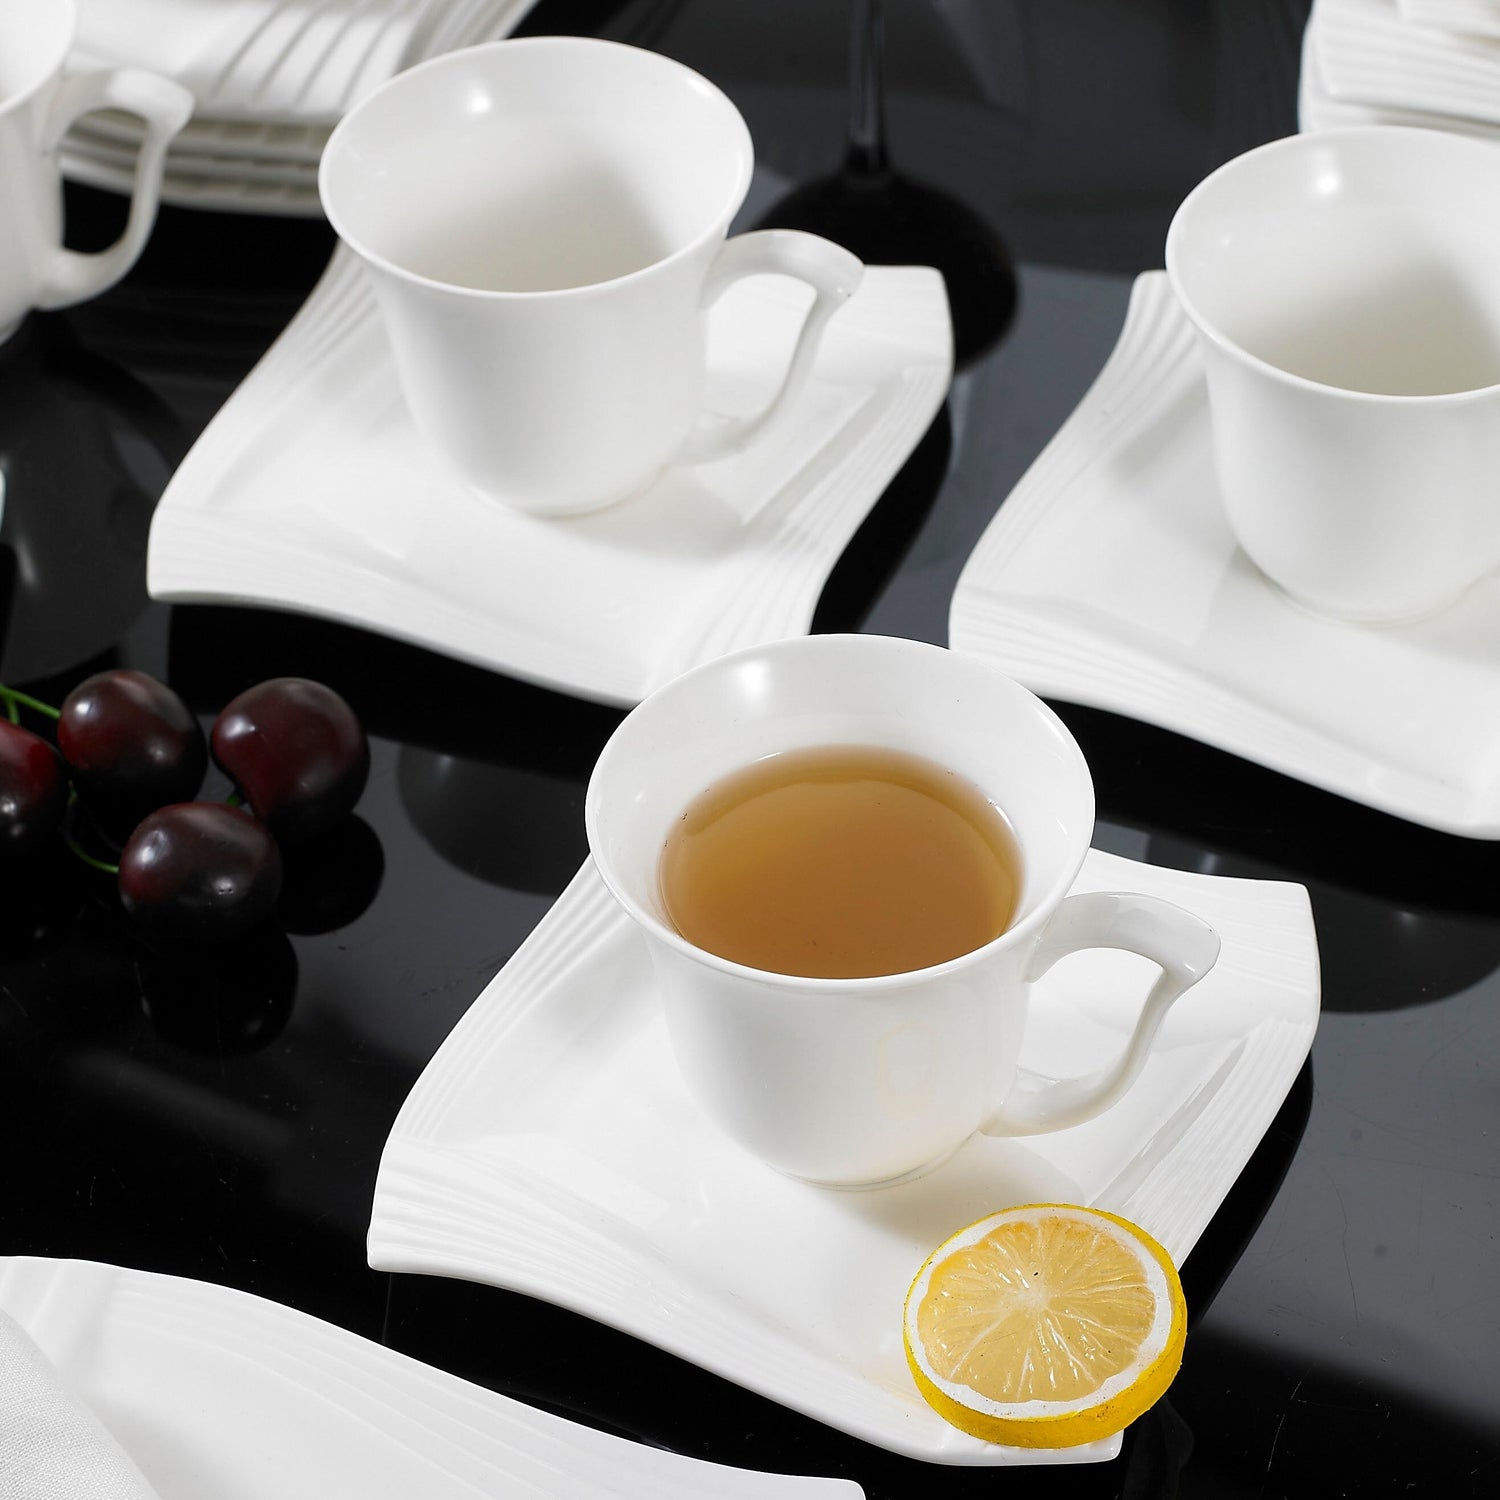 Amparo 18-Piece White Porcelain Coffee Tea Drinkware Sets including Cup,Saucers and Dessert Plates for 6 - Nordic Side - 18, Amparo, and, Coffee, CupSaucers, Dessert, Drinkware, for, Home, in